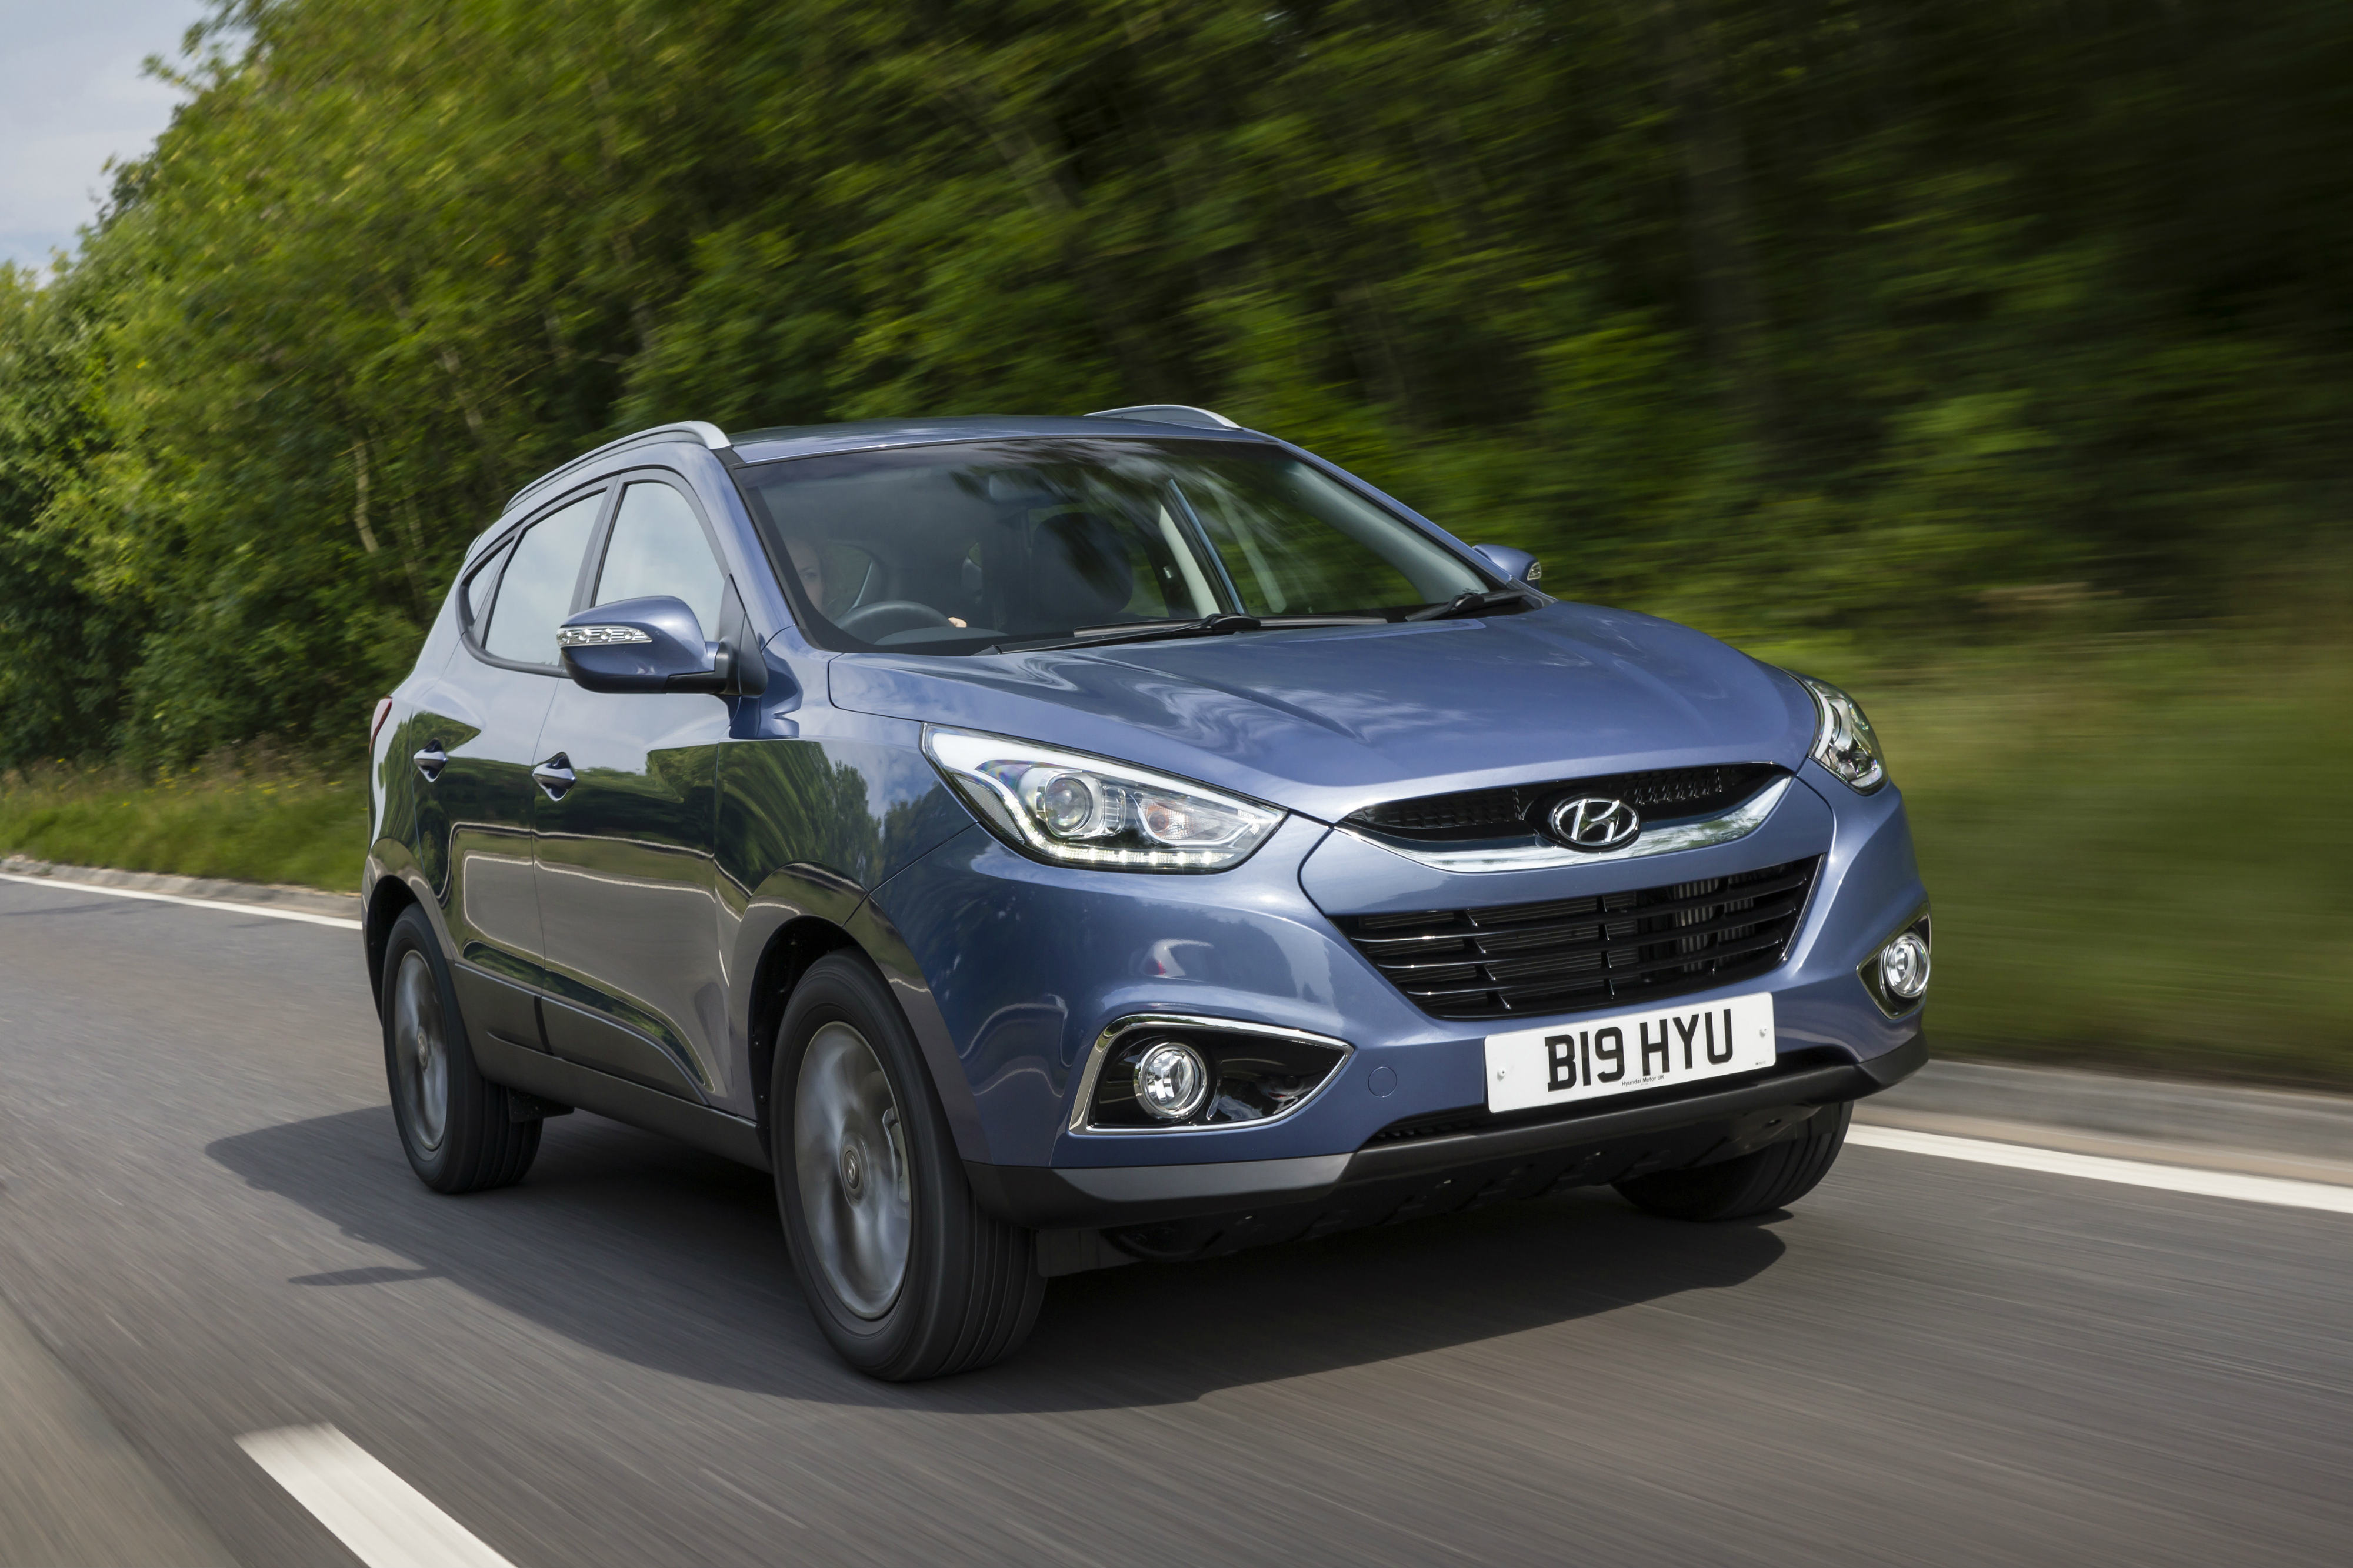 Hyundai iX35 has one of the largest boots in its class